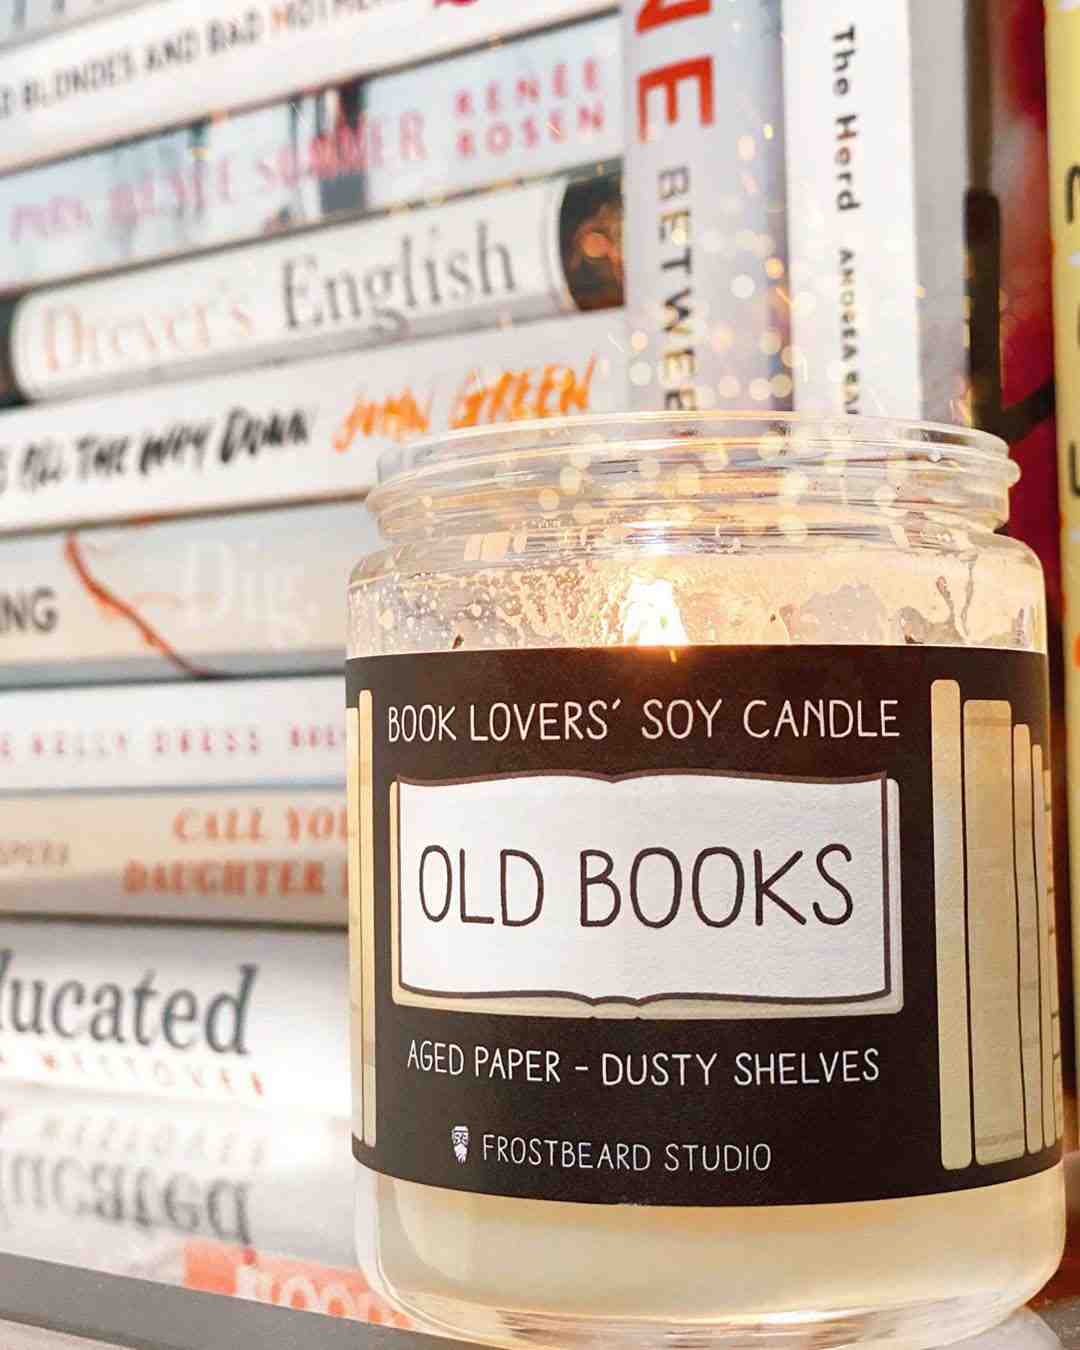 Sustainable Scents: A Guide to Buying Small Business Soy Candles